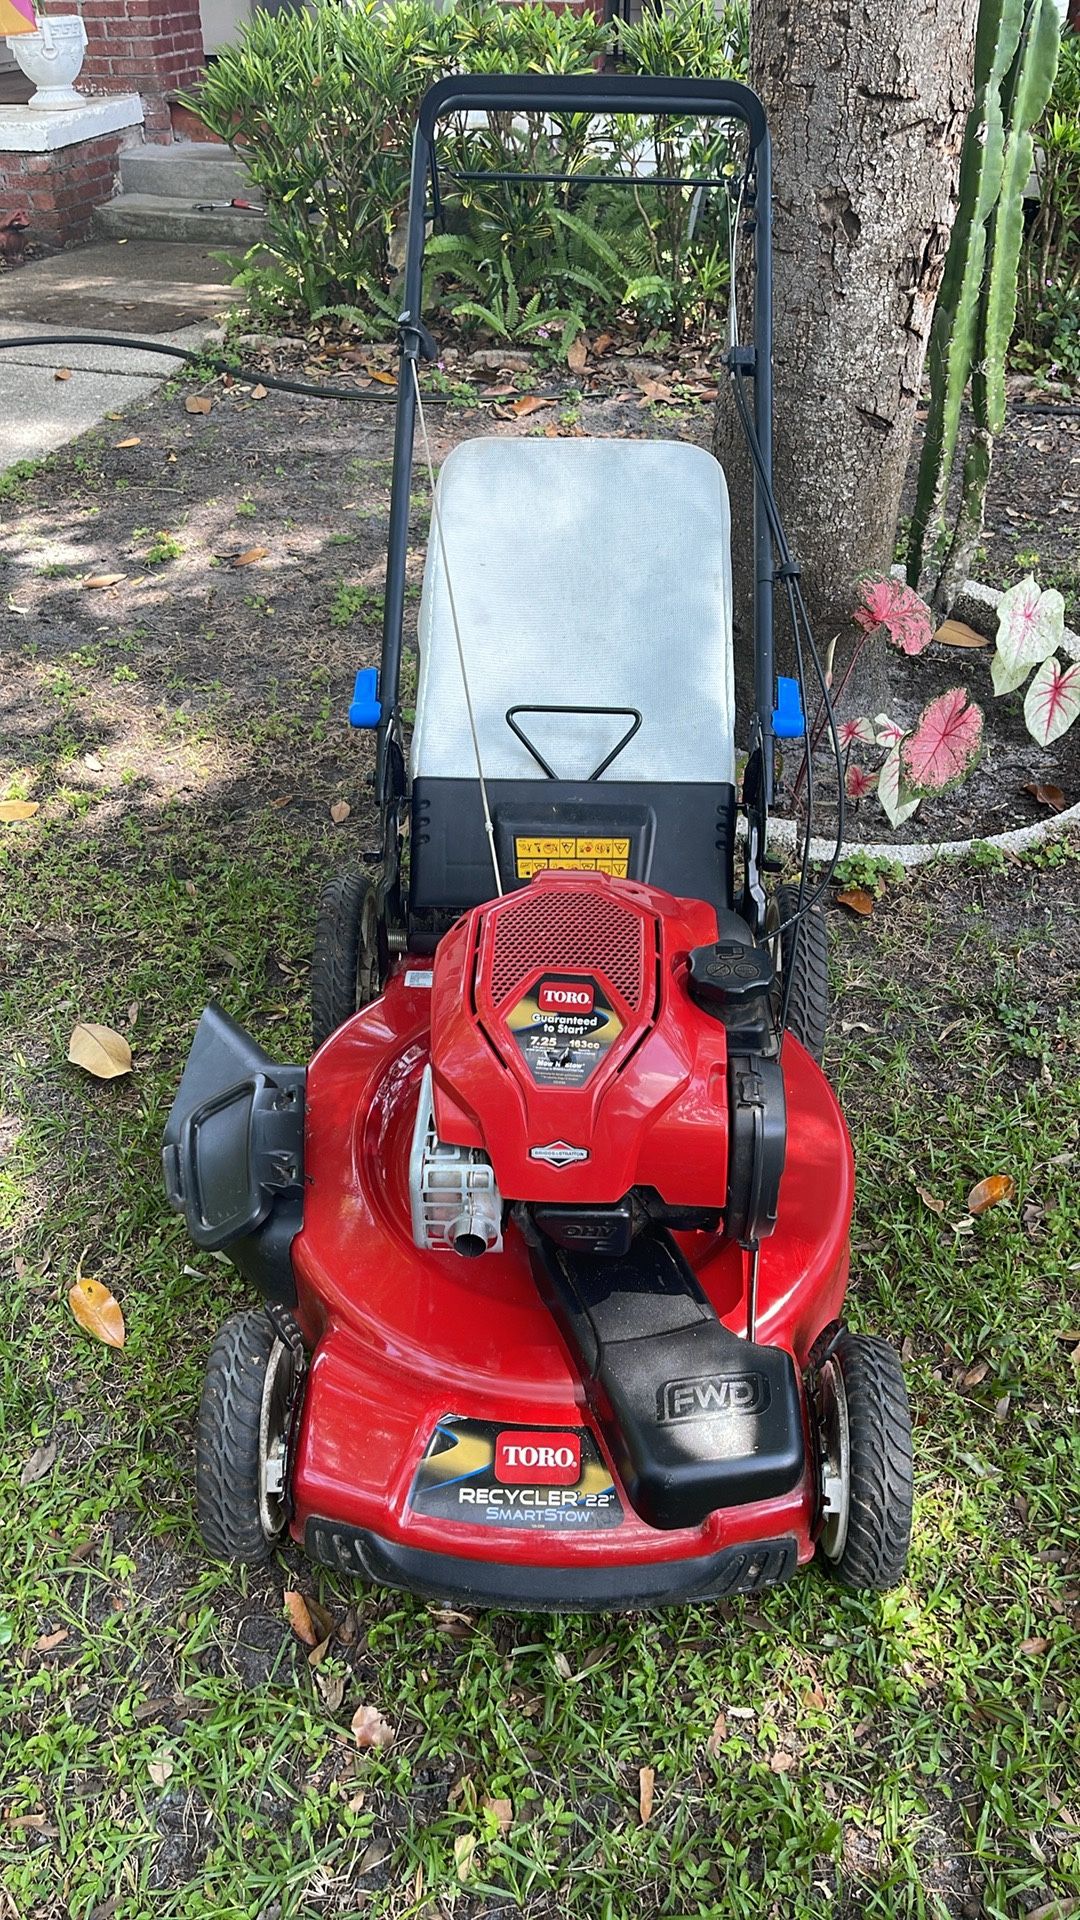 Self Propelled High Wheel Lawn Mower LBSN Toro Recycler with SmartStow 22” cut witha 7.25 HP engine